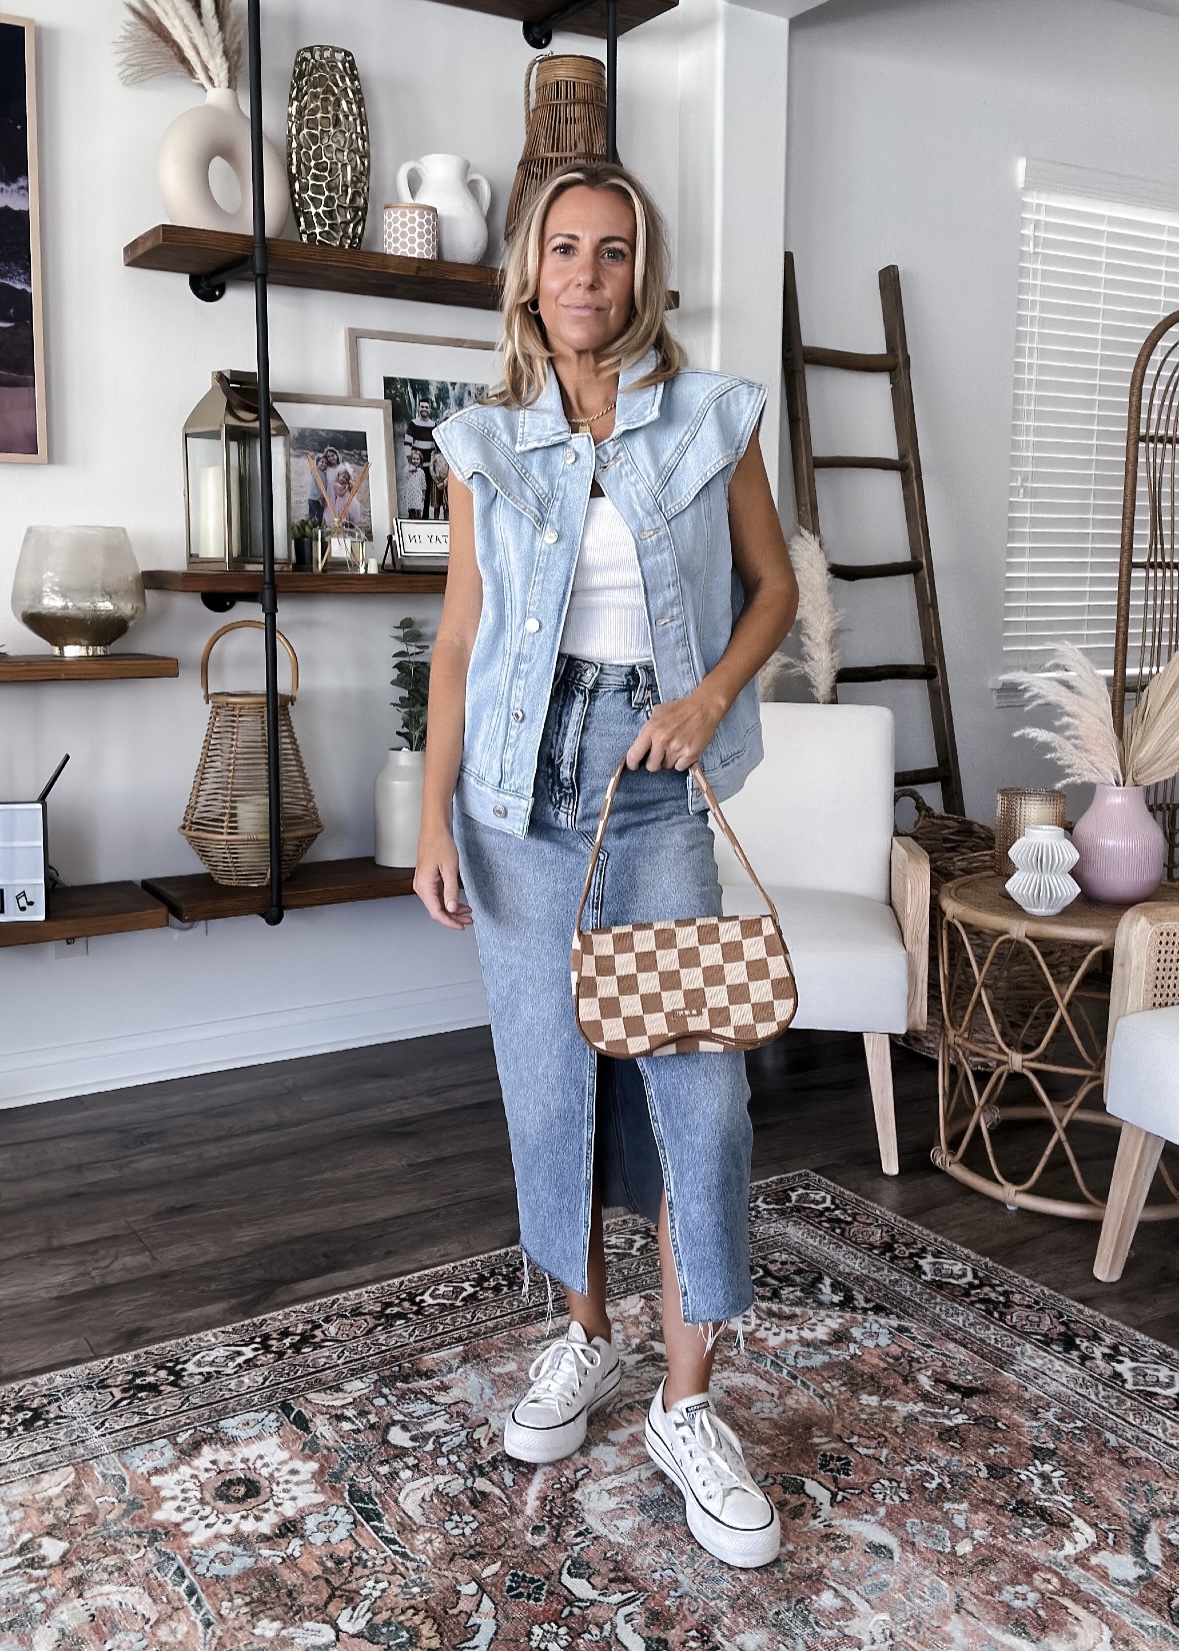 DENIM SKIRTS-Jaclyn De Leon style. Sharing a few easy looks that can work for all different occasions from dinner dates and work events to running errands.